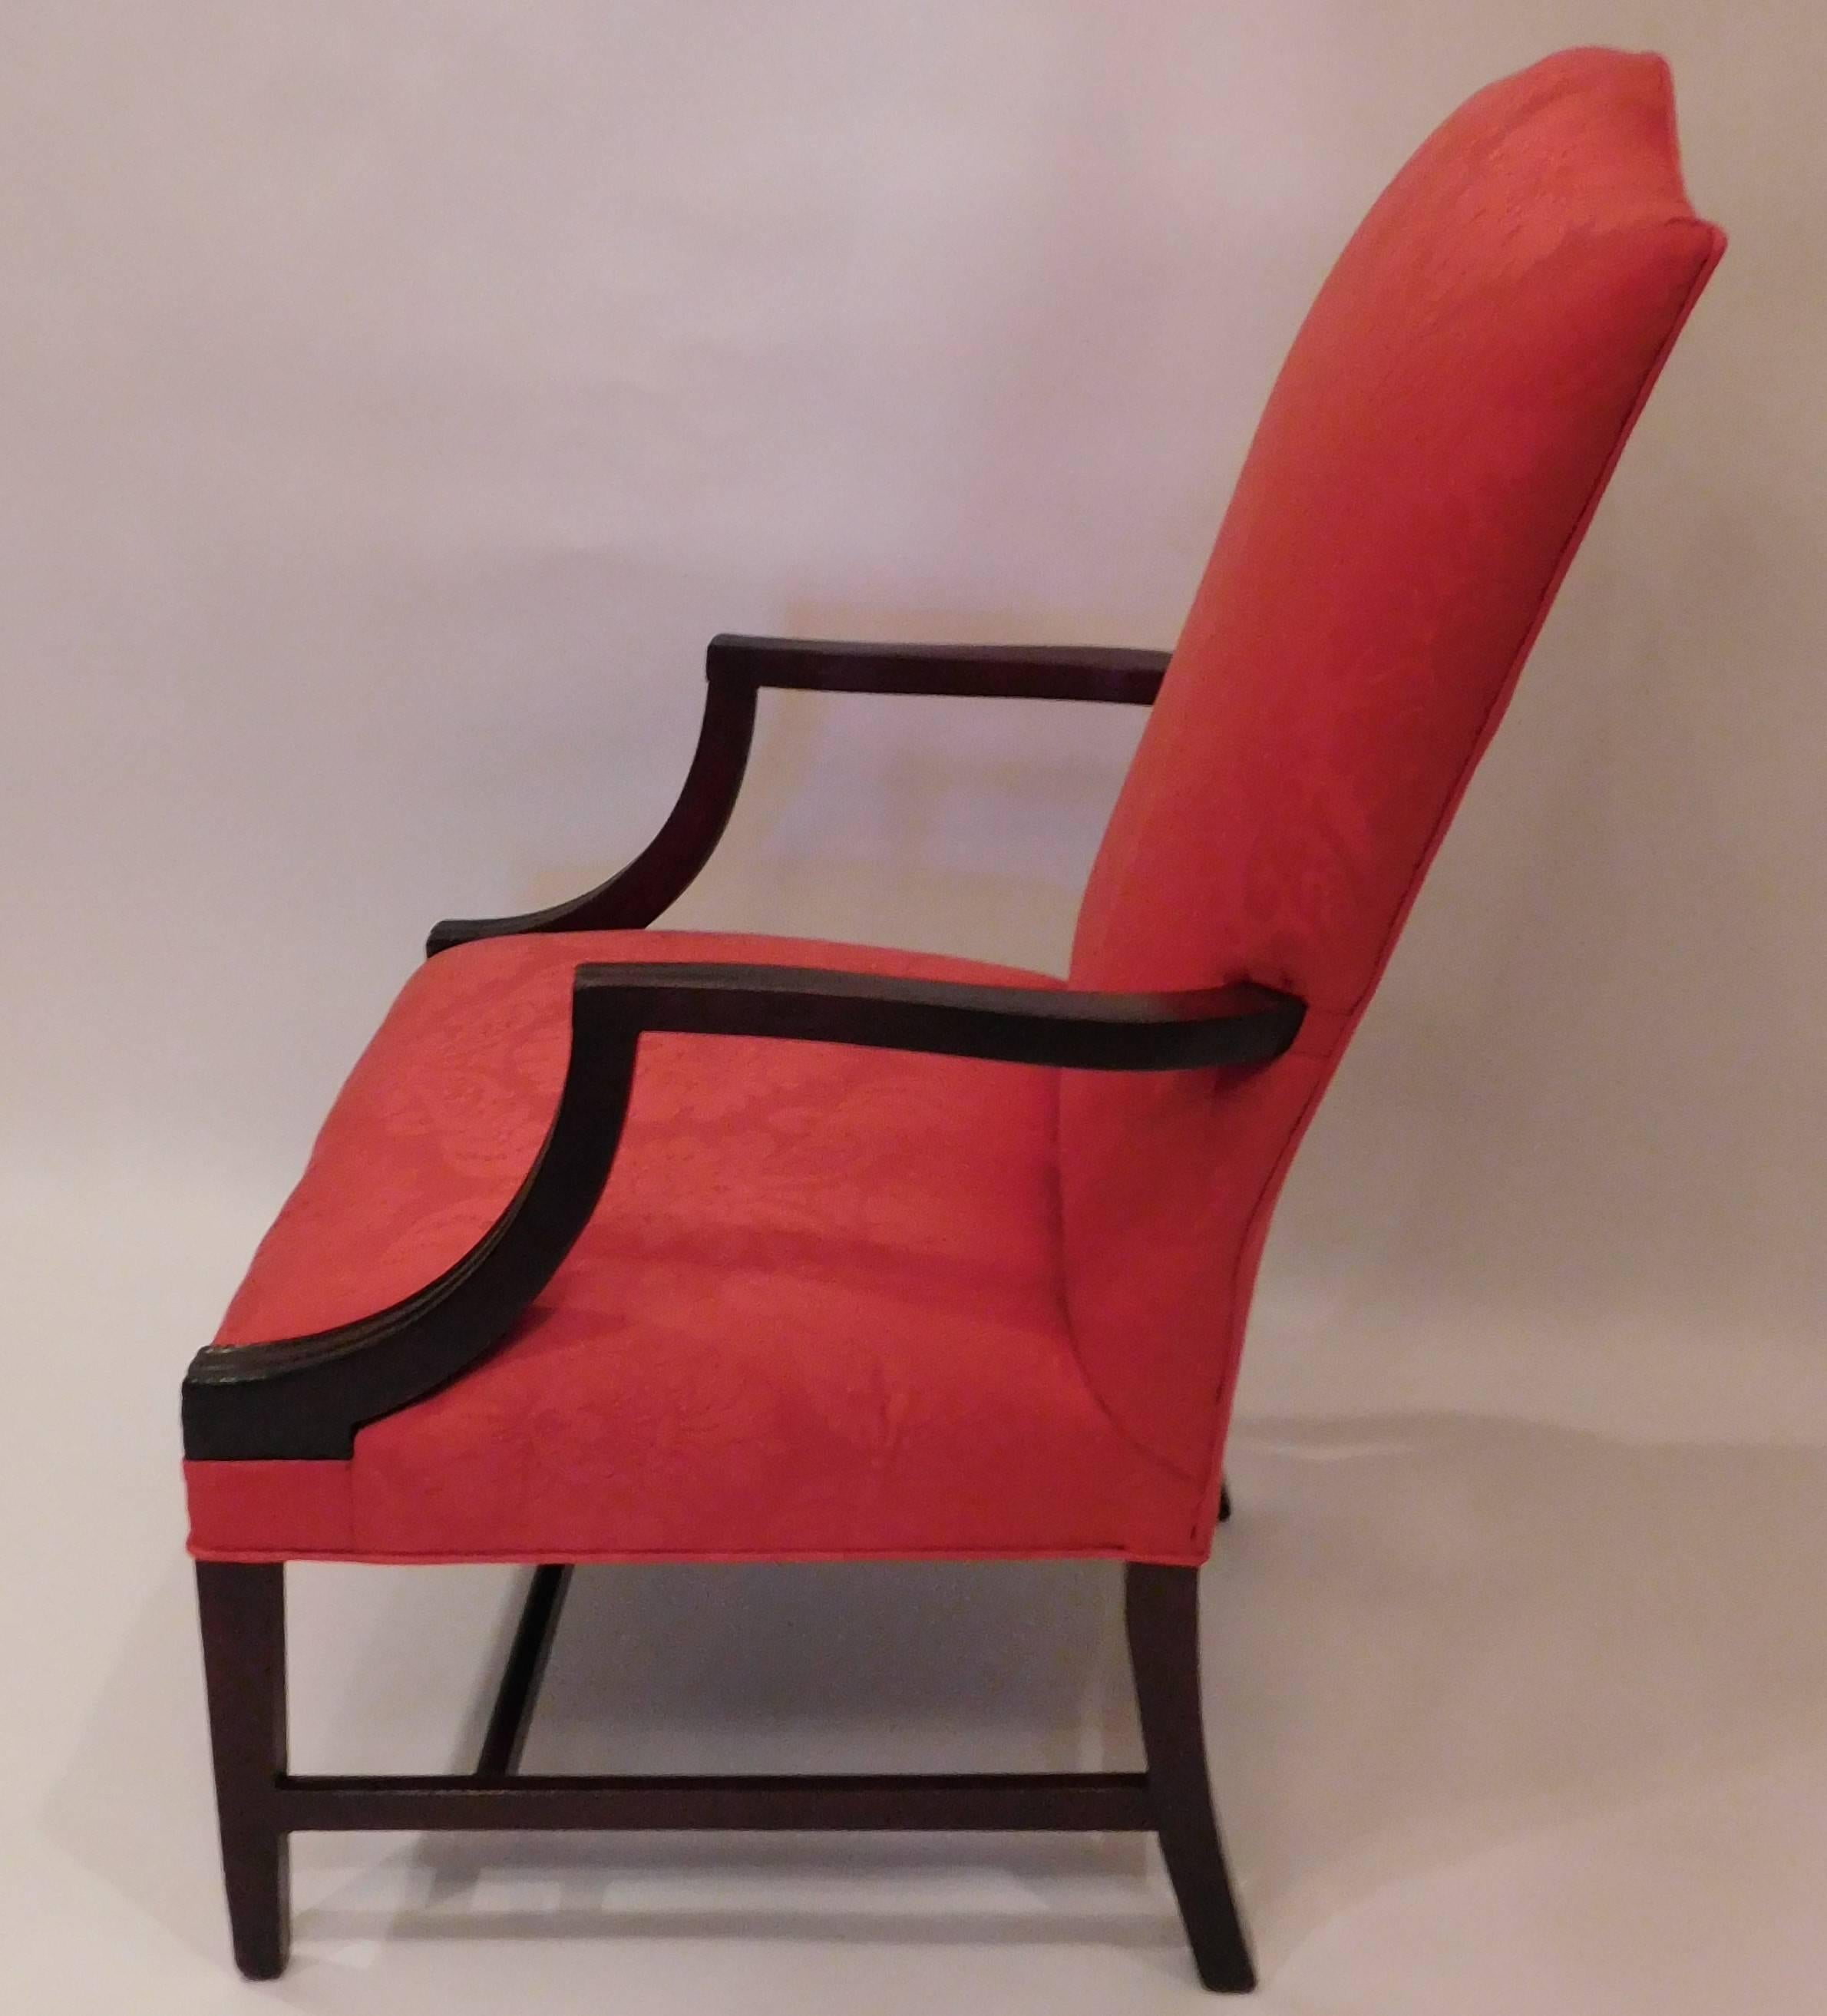 Hepplewhite design with mahogany molded arms and tapered legs, H-stretcher. Newly upholstered in red damask.